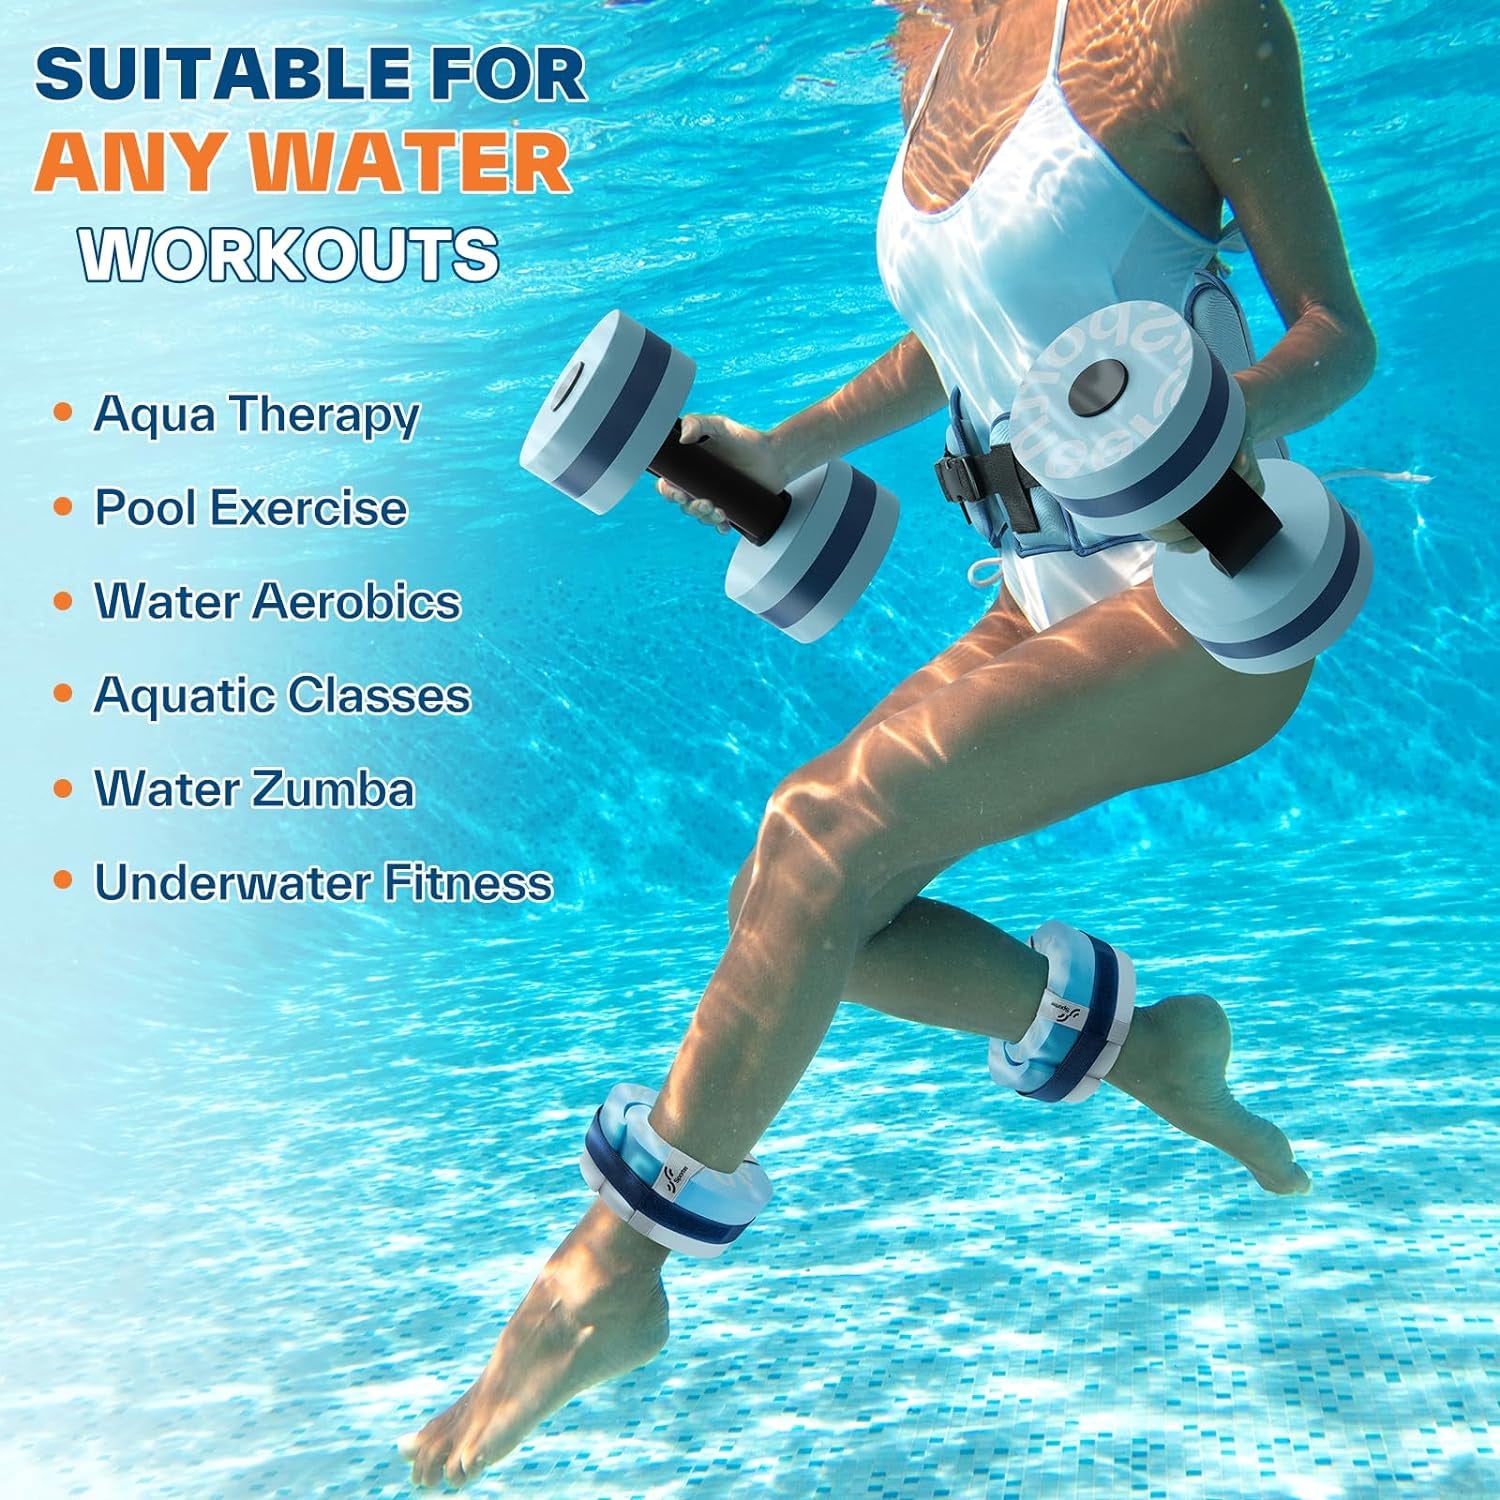 Water Aerobics Pool Exercise Equipment:  Water Workout Combo Set Includes High Density Water Dumbbell Aqua Belt Water Ankle Weights for Aquatic Therapy Pool Fitness Water Exercise